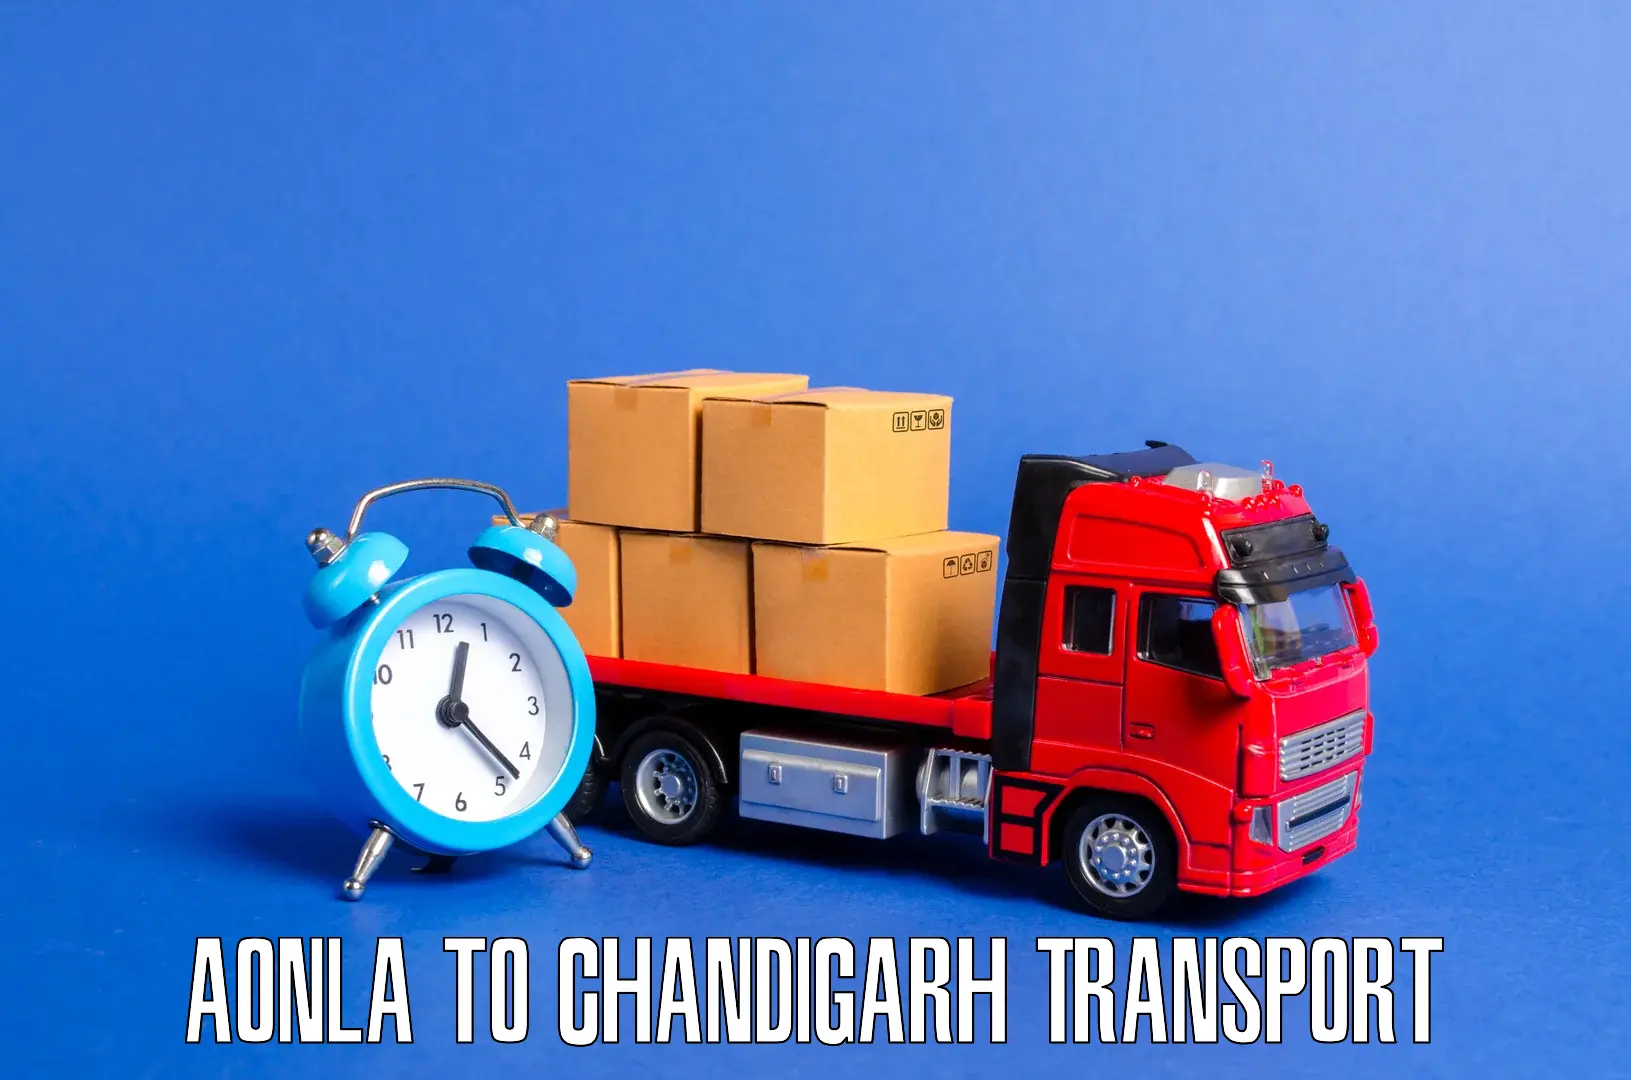 Delivery service in Aonla to Chandigarh